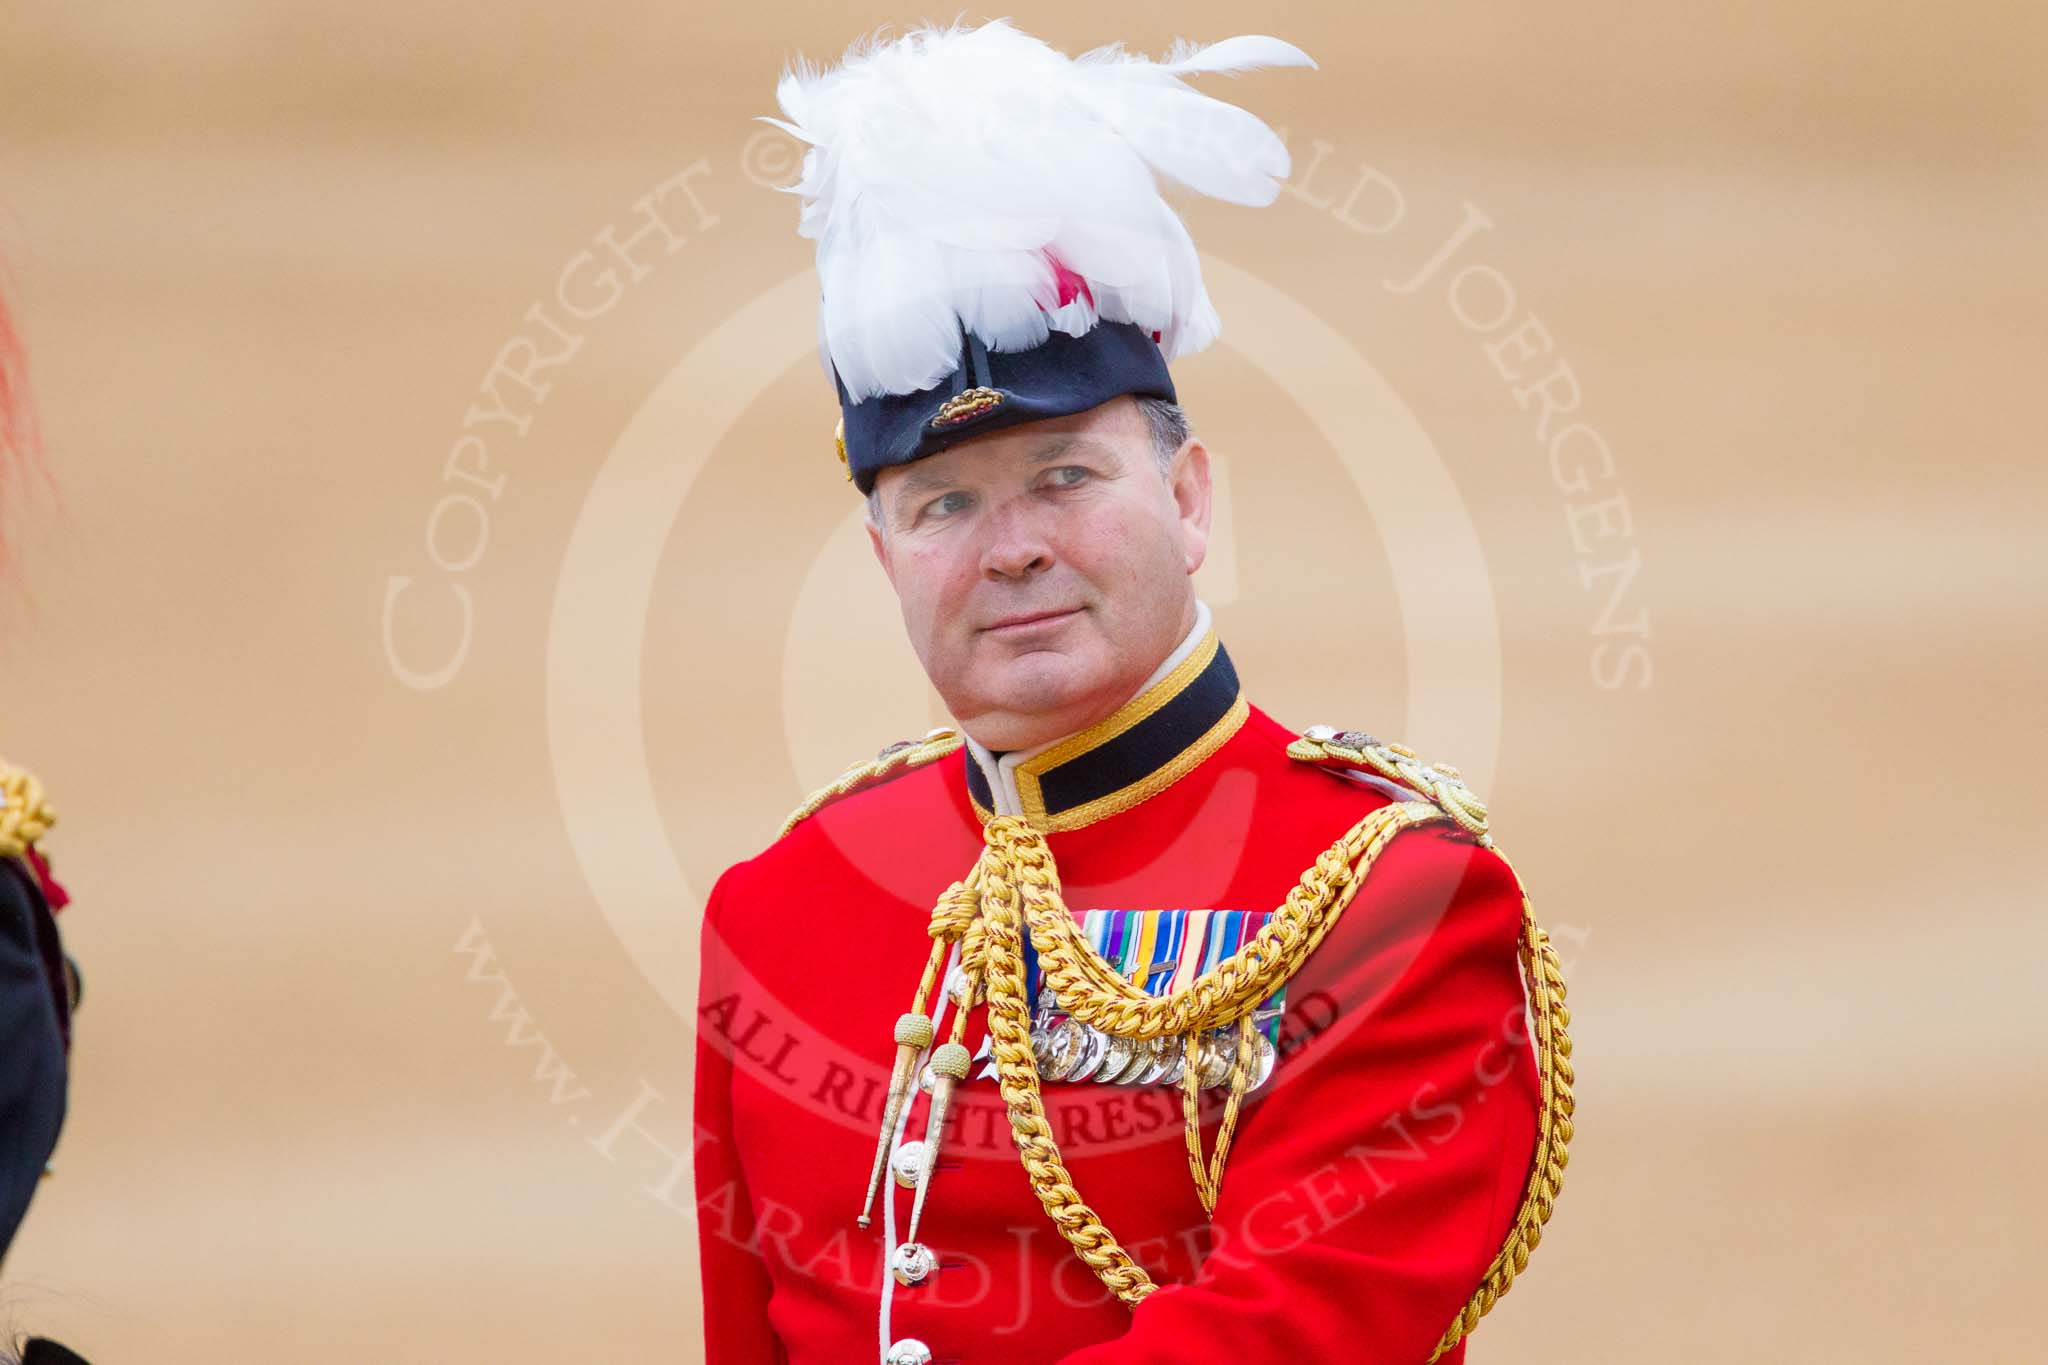 Trooping the Colour 2015.
Horse Guards Parade, Westminster,
London,

United Kingdom,
on 13 June 2015 at 11:01, image #272